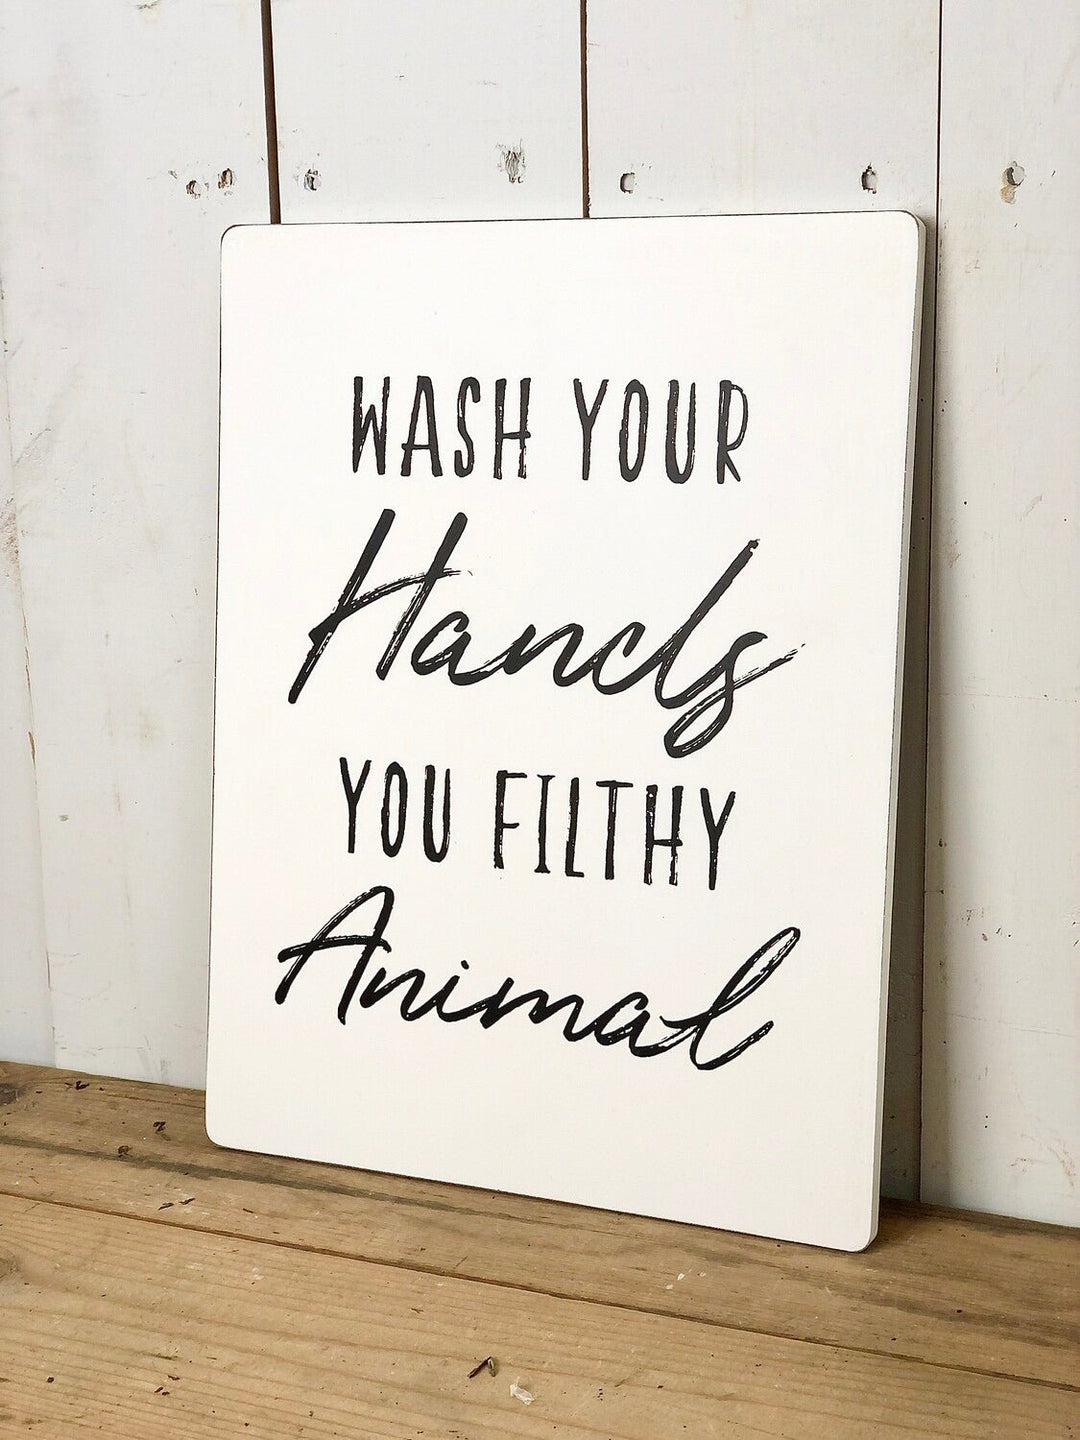 "Wash Your Hands You Filthy Animal" Signage